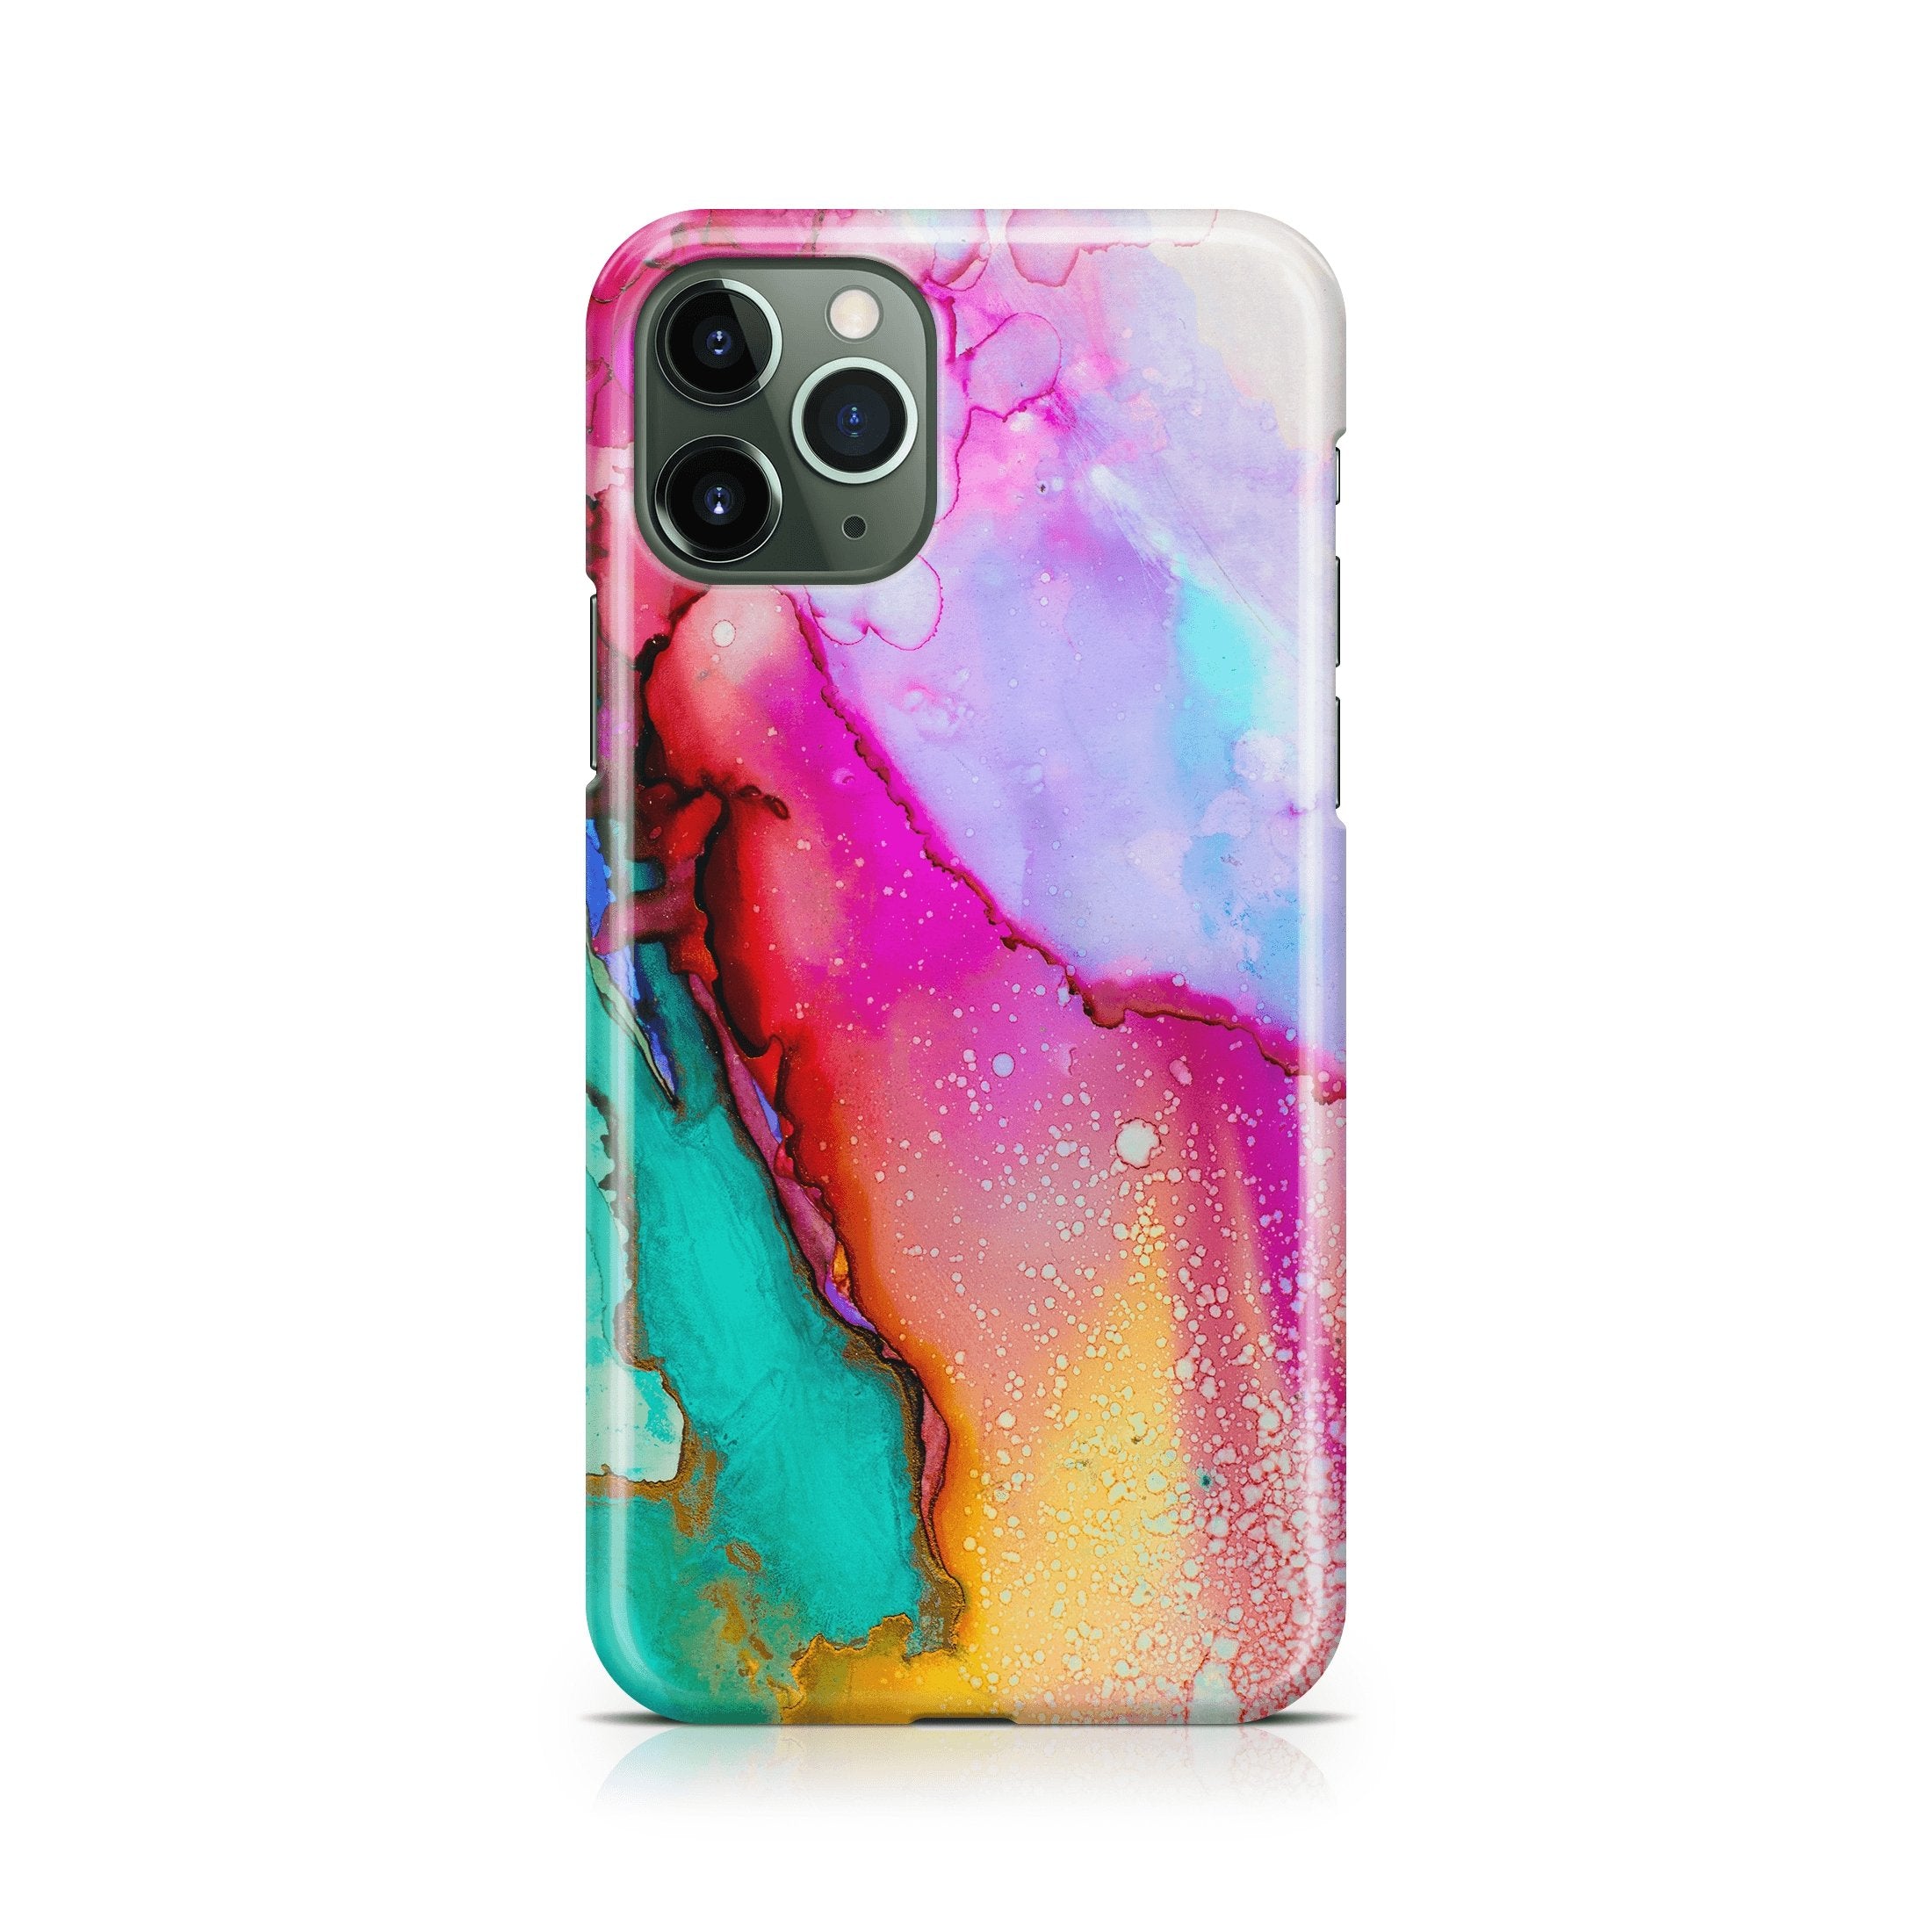 Rainbow Splash - iPhone phone case designs by CaseSwagger